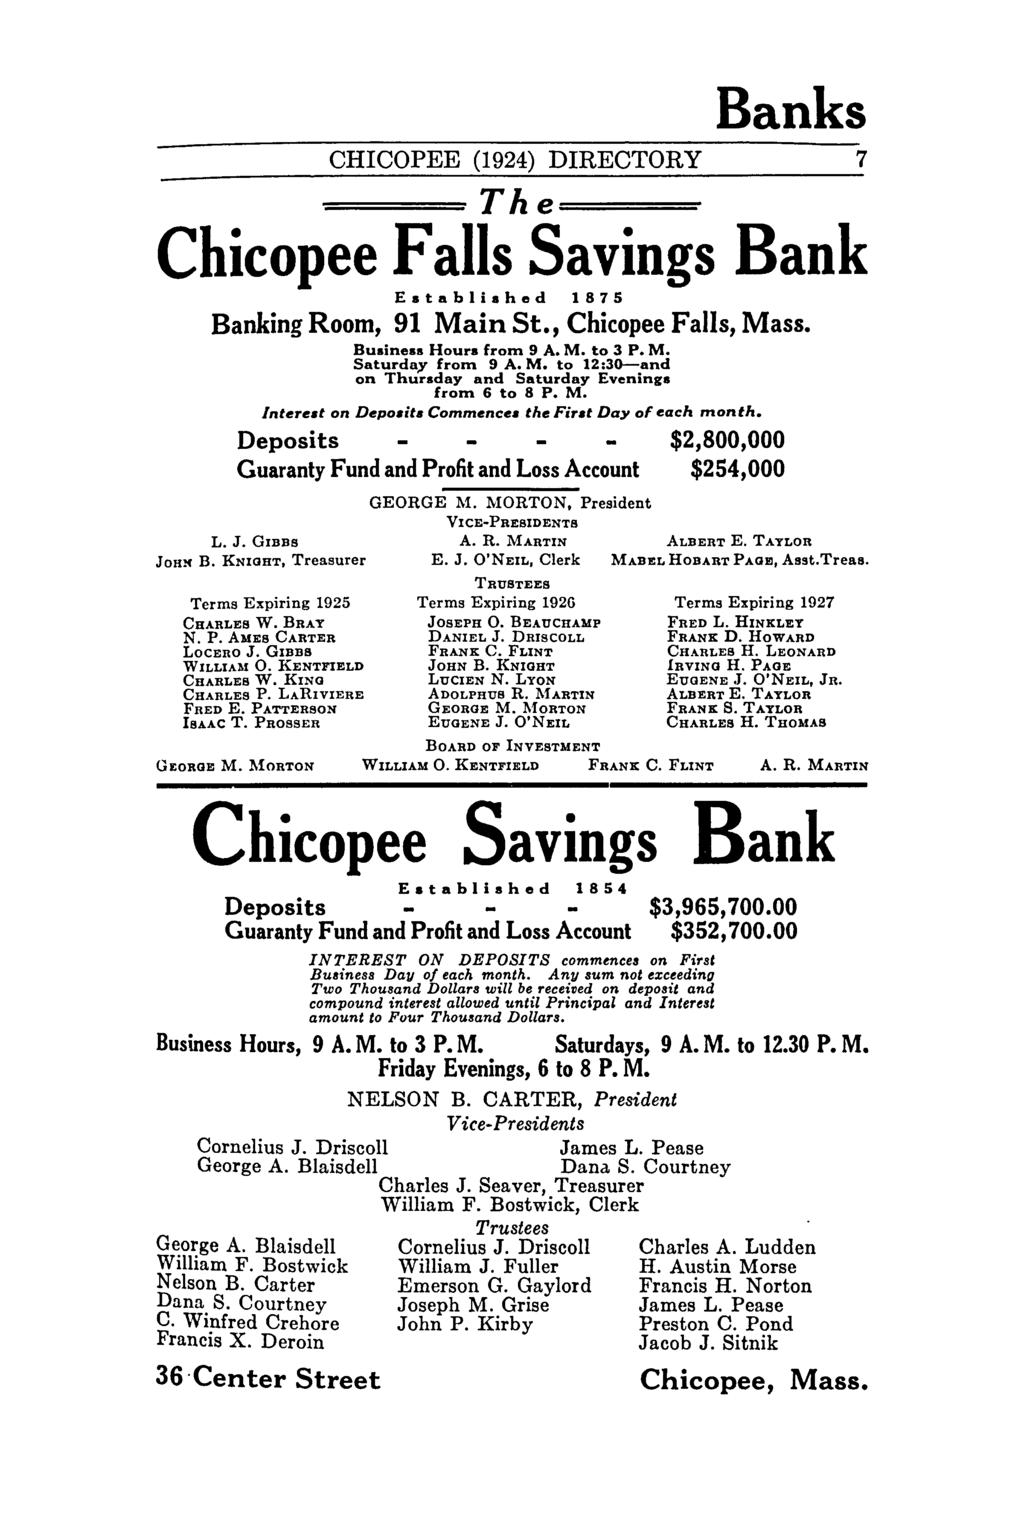 Banks CHICOPEE (1924) DIRECTORY 7 The====- Chicopee Savings Bank Established 1875 Banking Room, 91 Main St., Chicopee, Mass. Business Hours from 9 A. M. to 3 P. M. Saturday from 9 A. M. to 12:3O-and on Thursday and Saturday Evenings from 6 to 8 P.